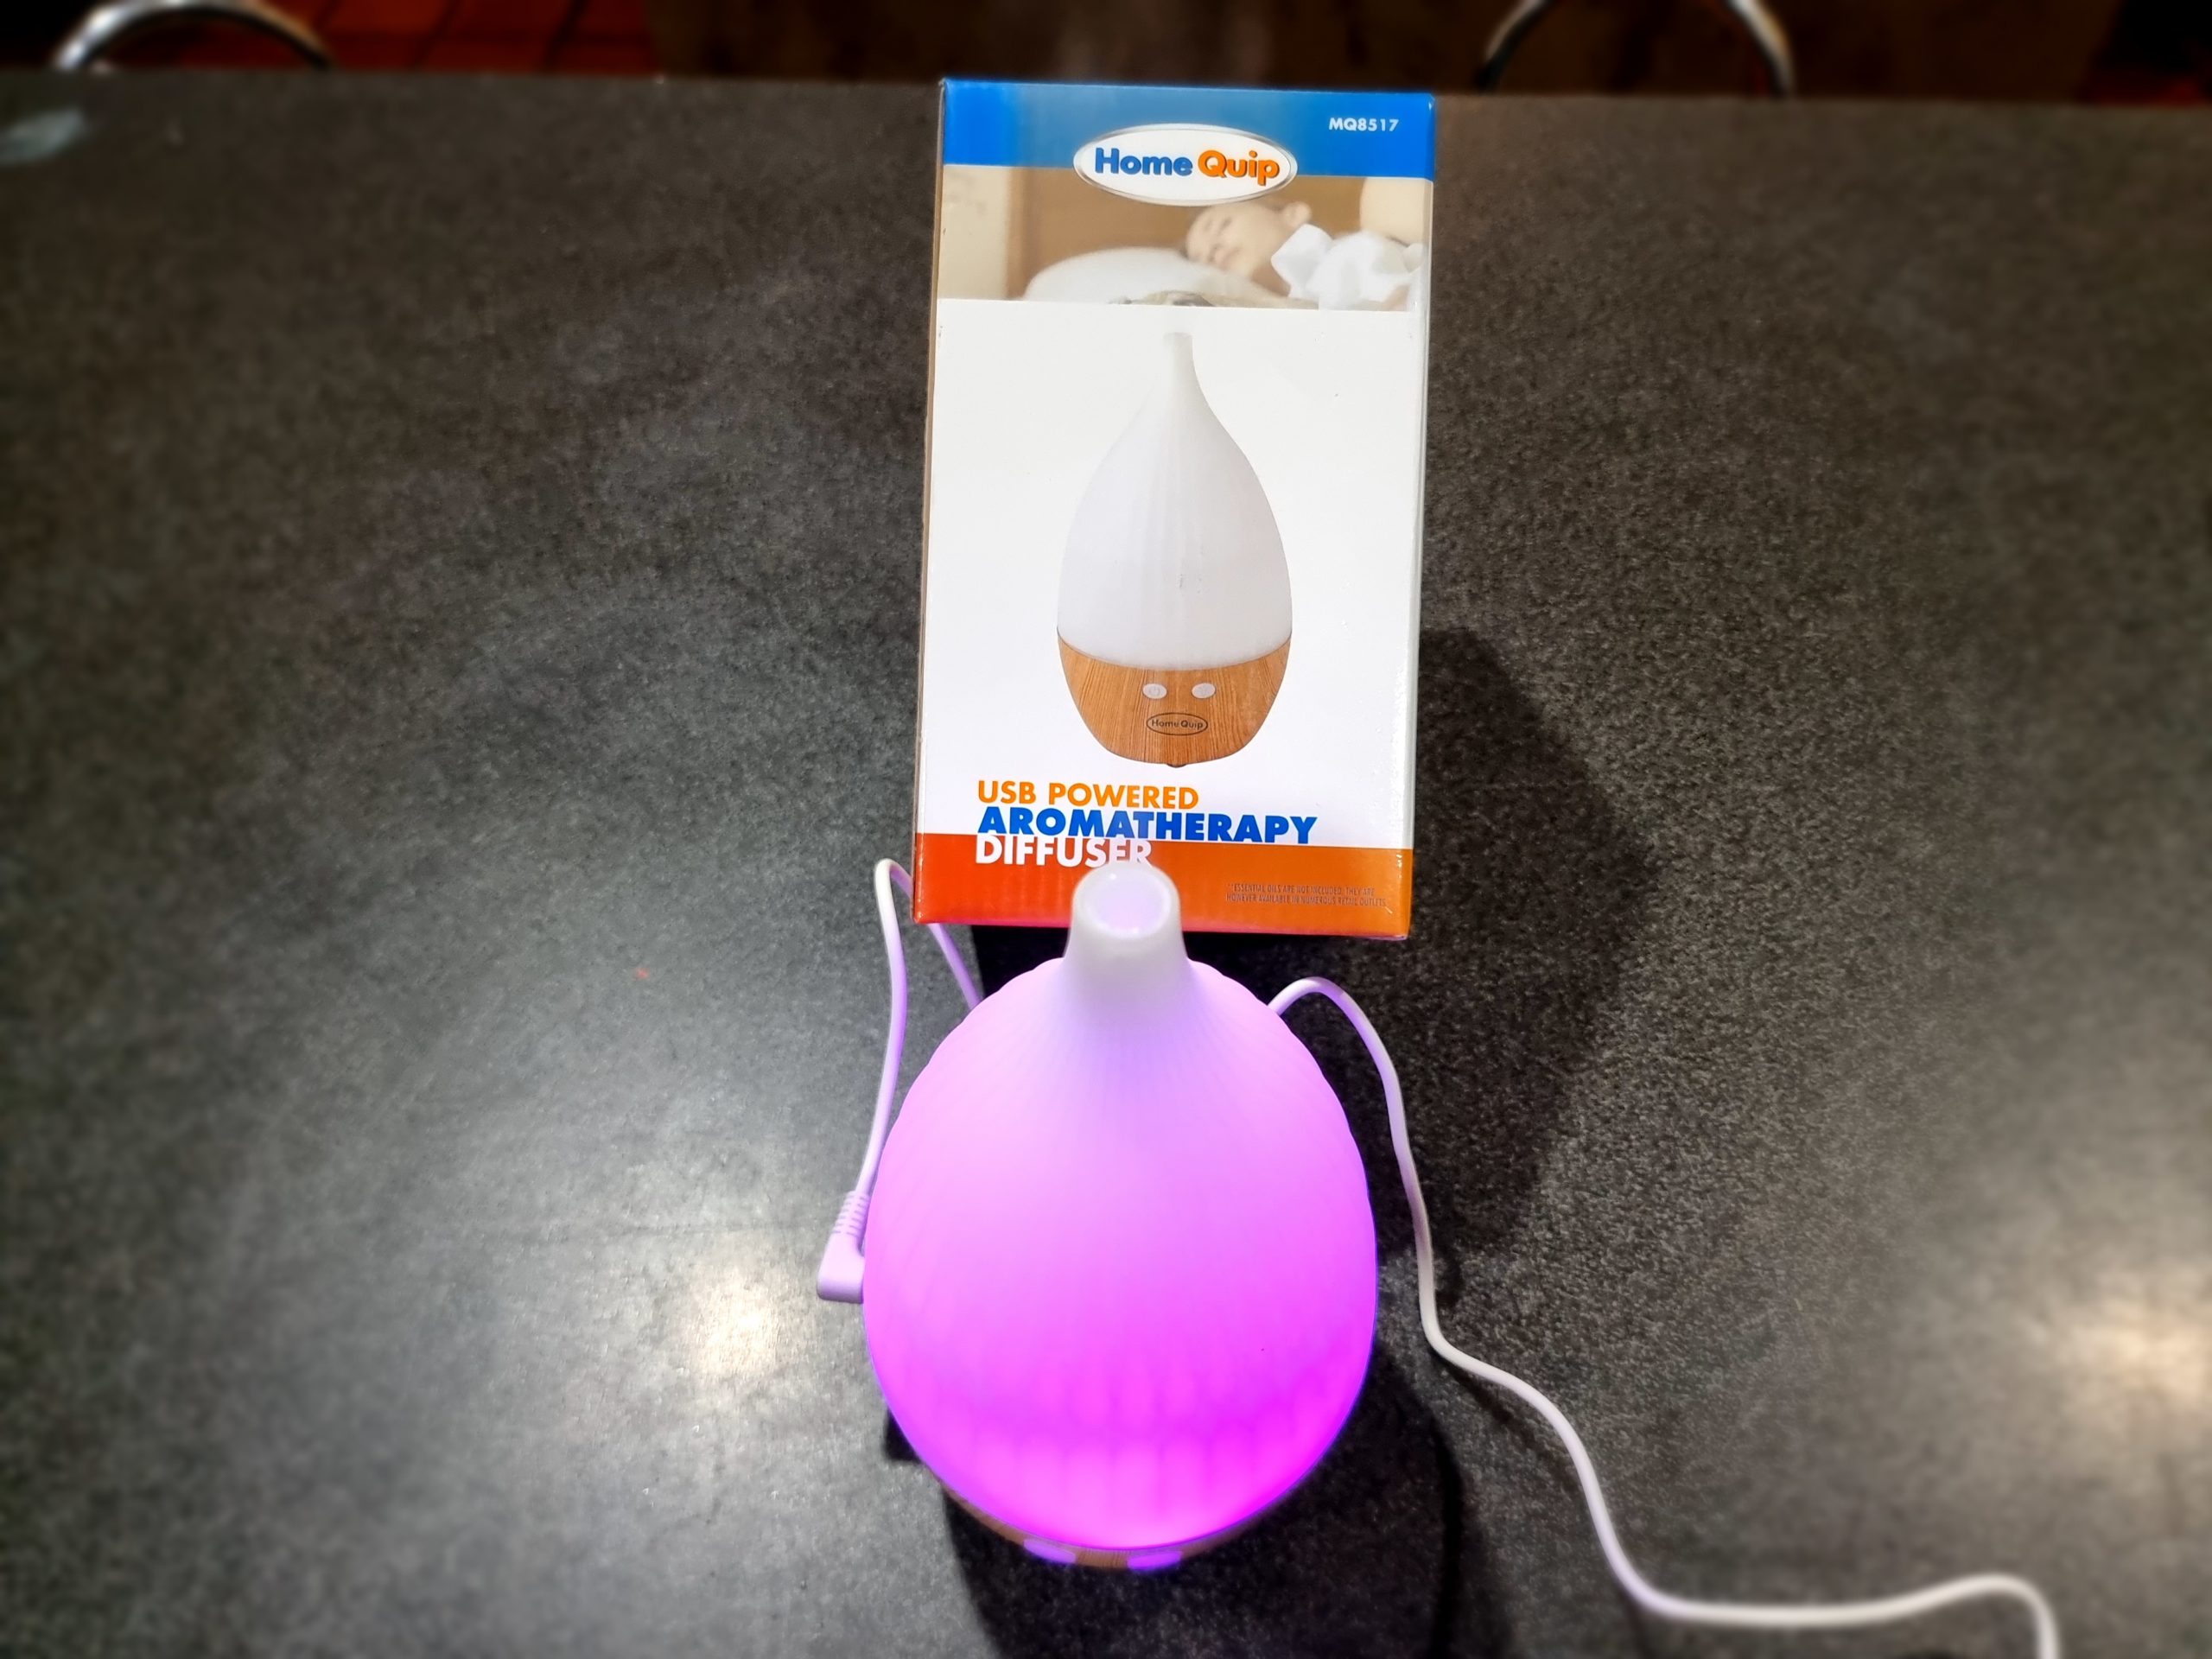 HomeQuip USB powered Aromatherapy Diffuser – Teardrop White – New